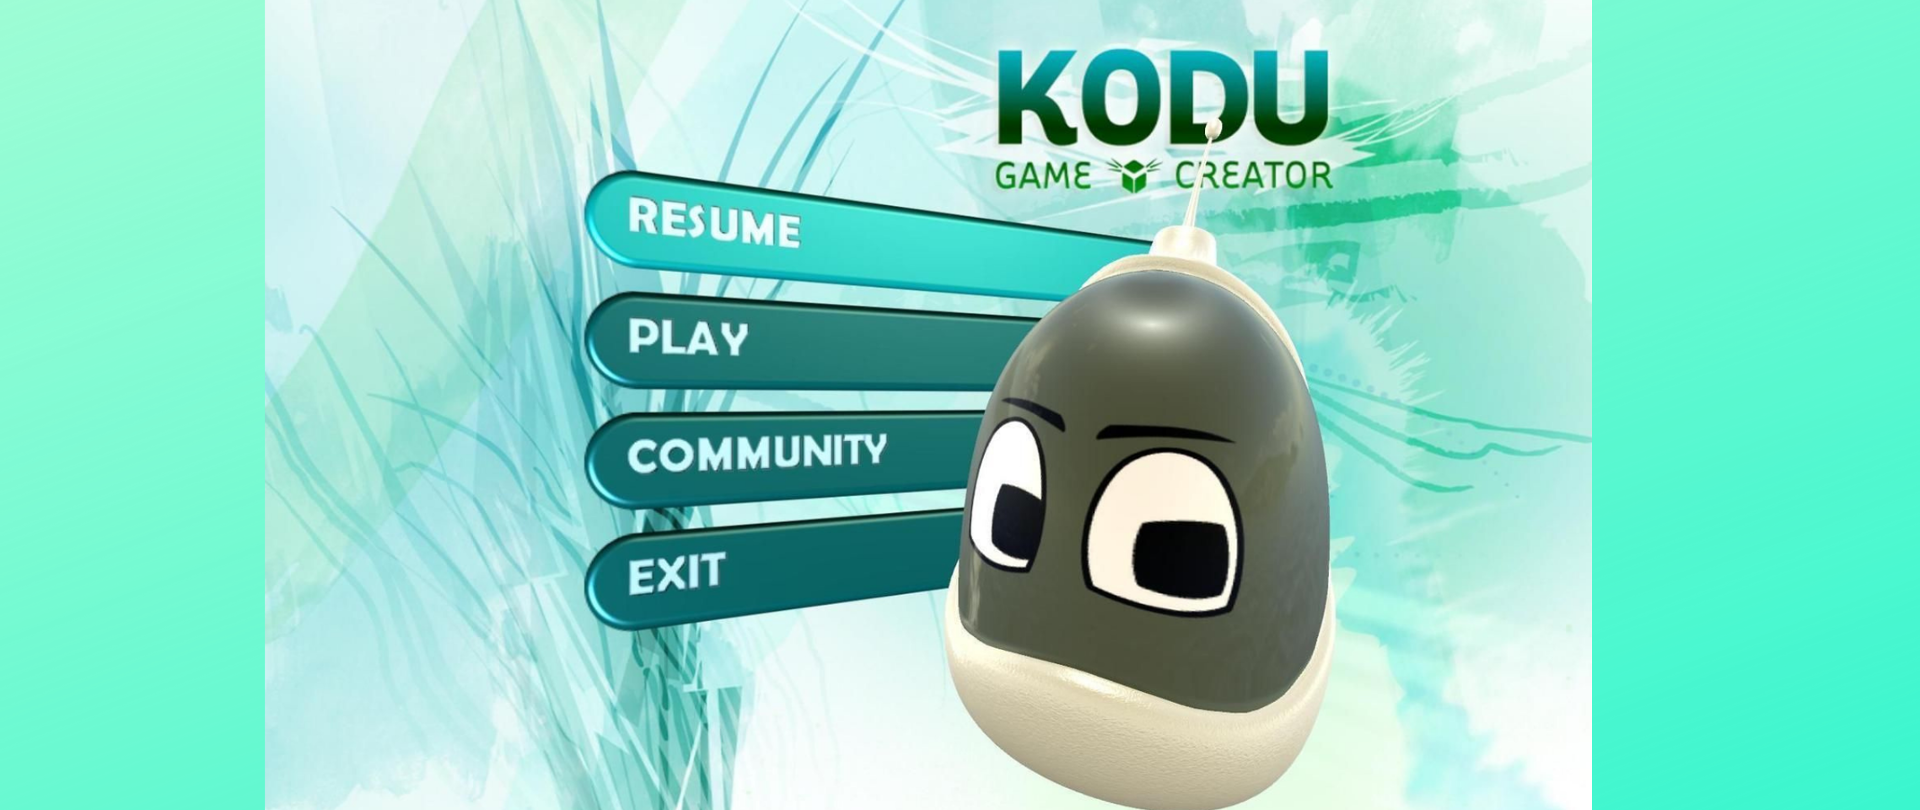 BIBLIOMAKERS. Video game creation: introduction to the Kodu world